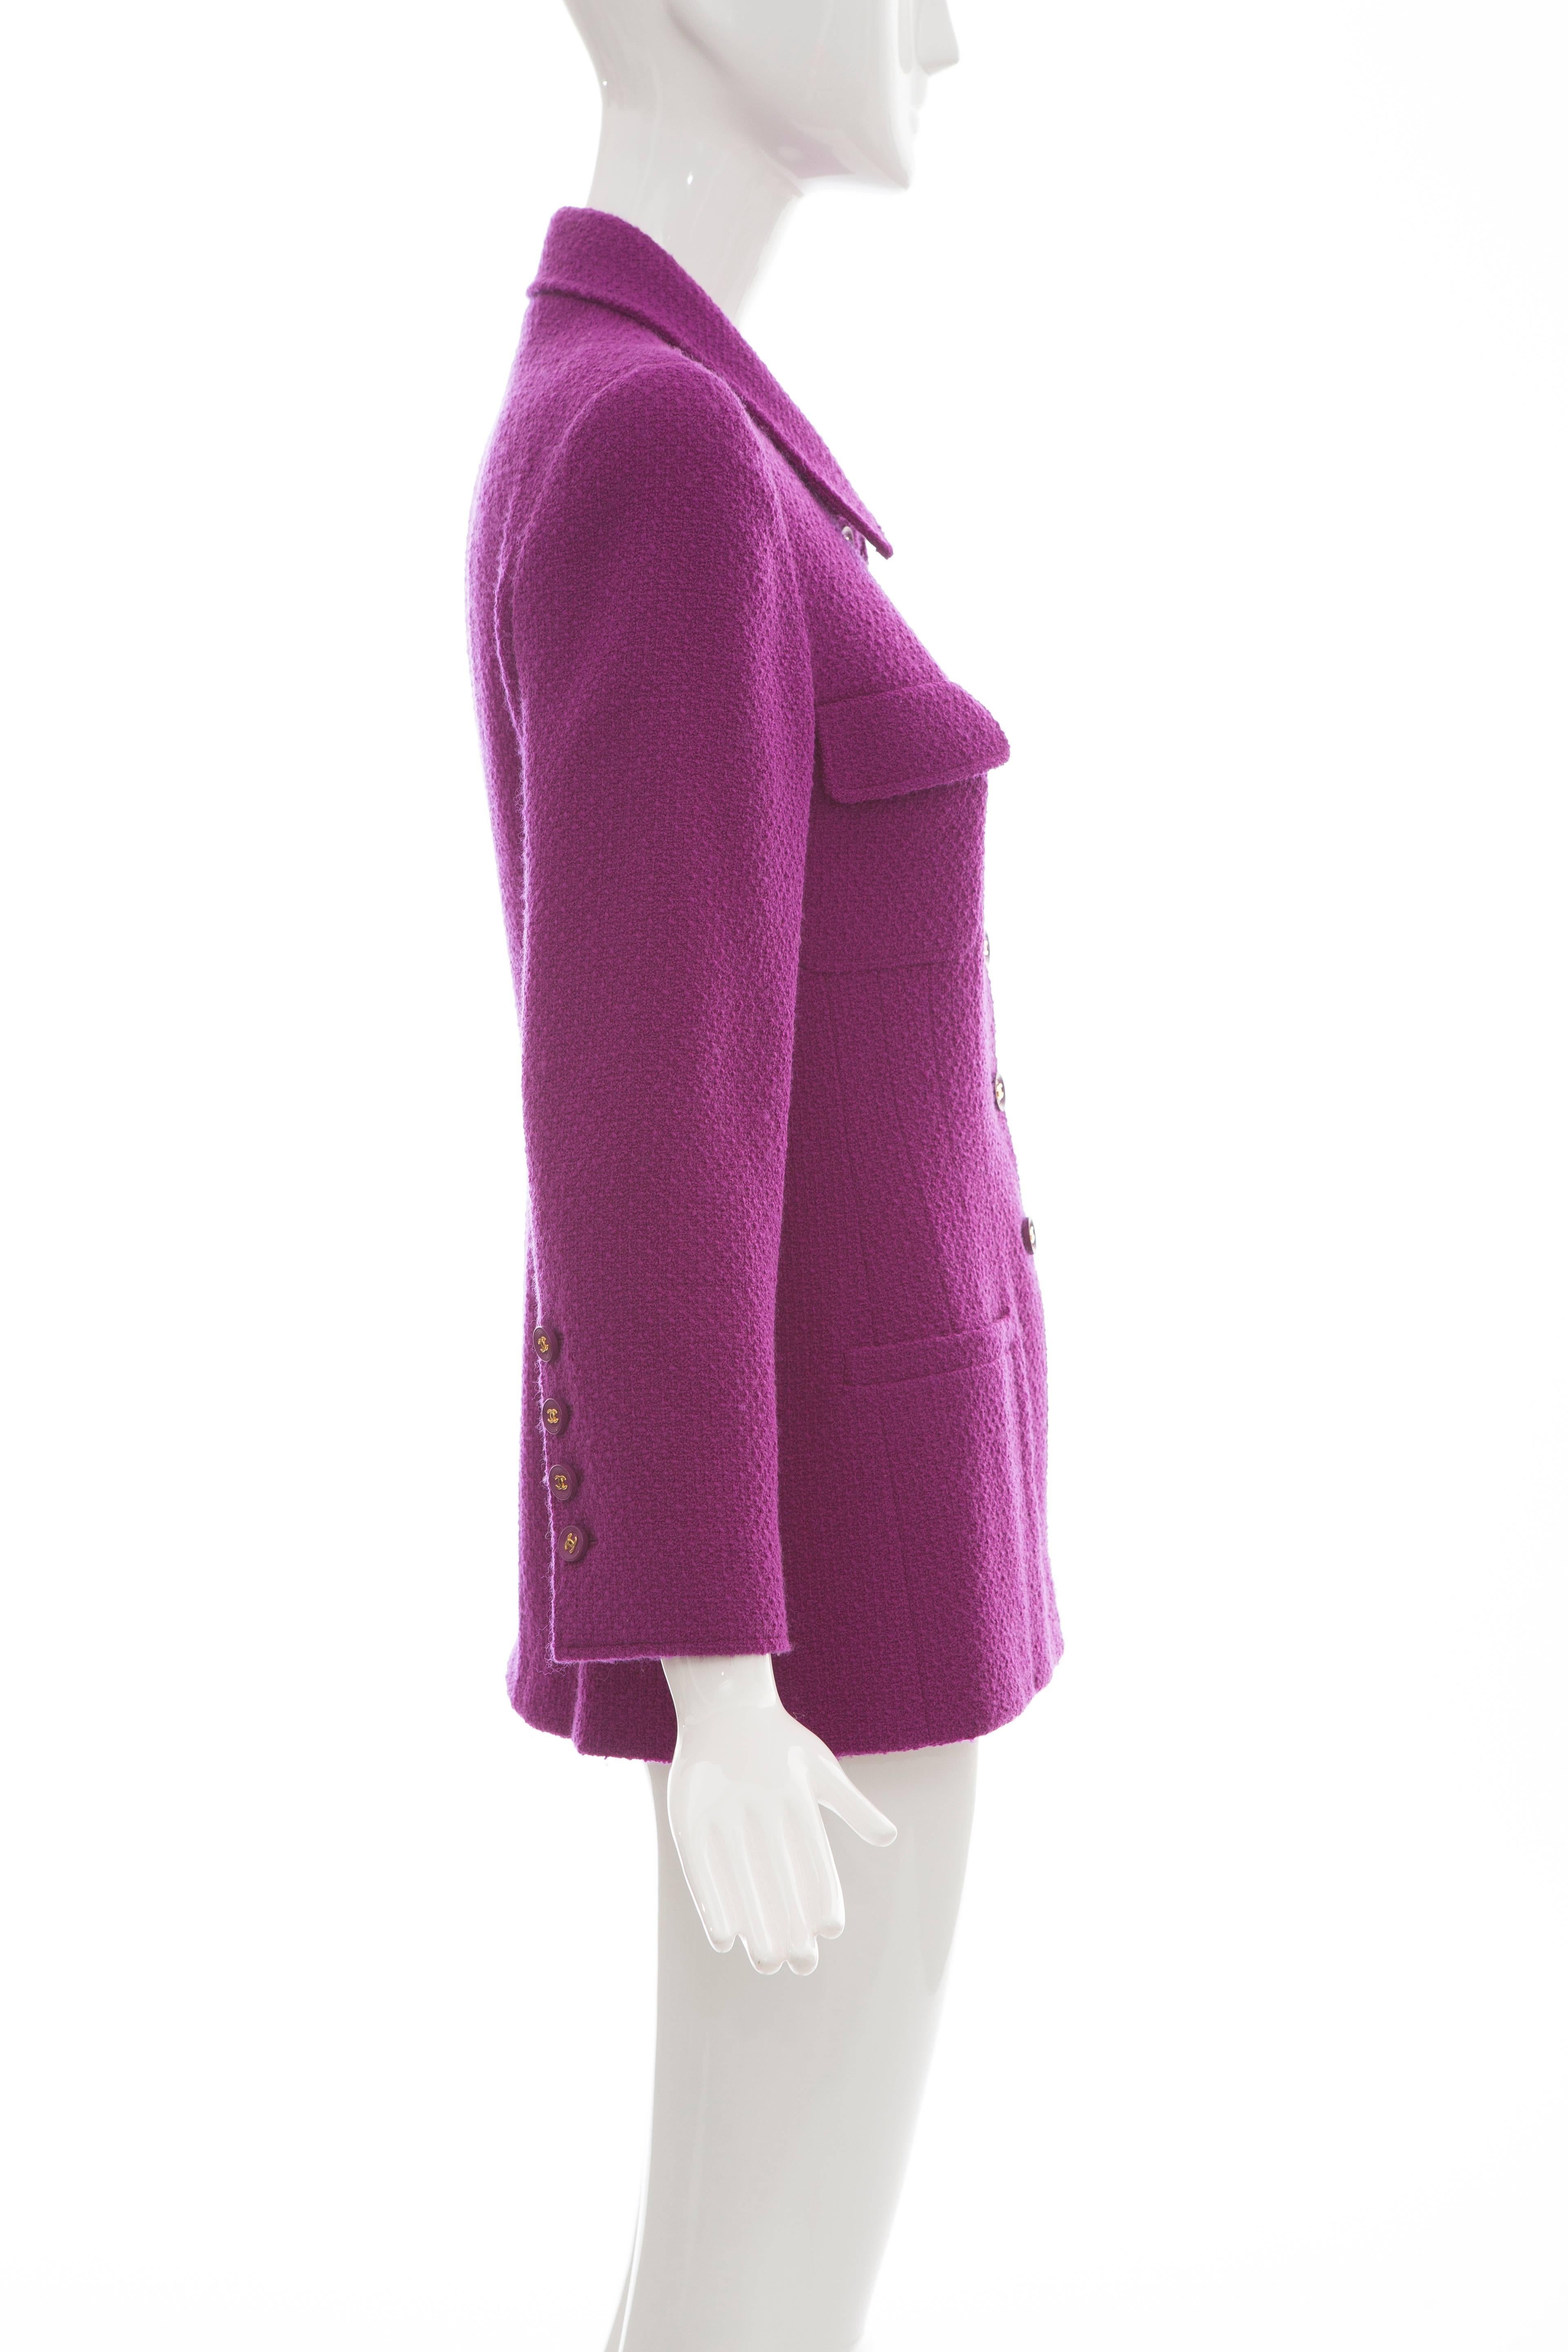 Chanel Violet Wool Crepe Button Front Jacket, Fall 1995 In Excellent Condition For Sale In Cincinnati, OH